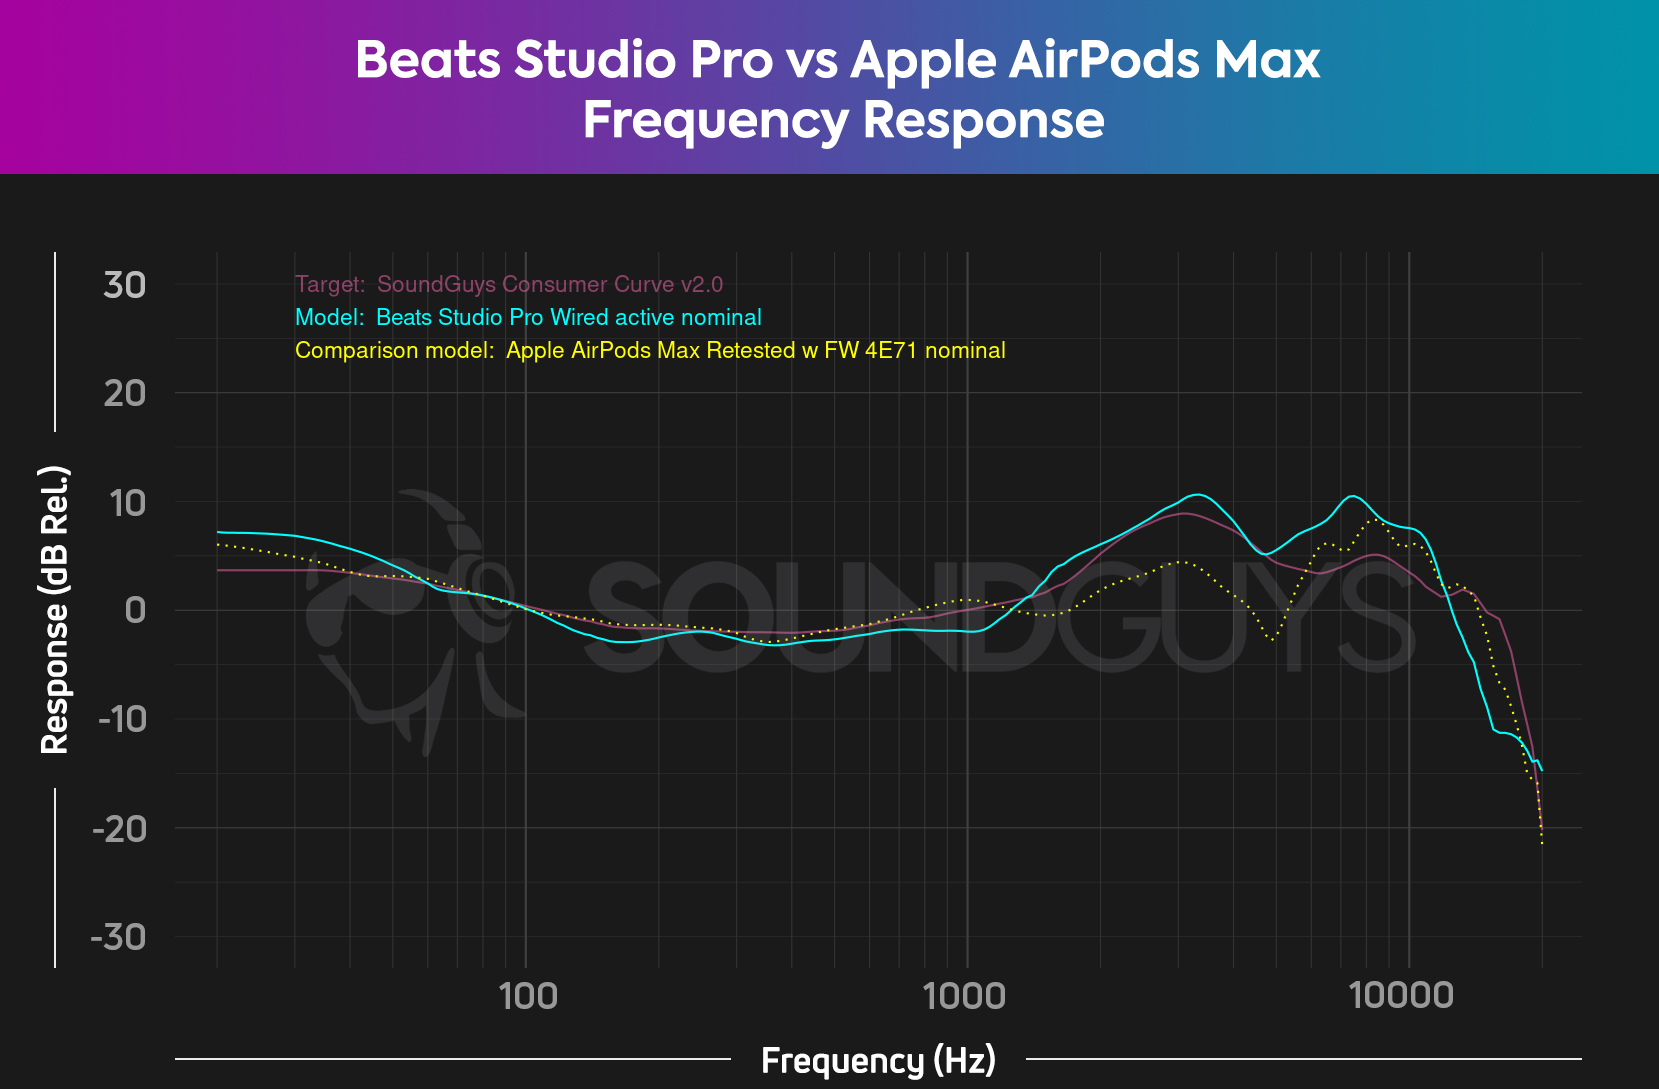 The Apple AirPods Max has a frequency response closer to the SoundGuys Consumer Curve than the Beats Studio Pro do, outside of the highs.